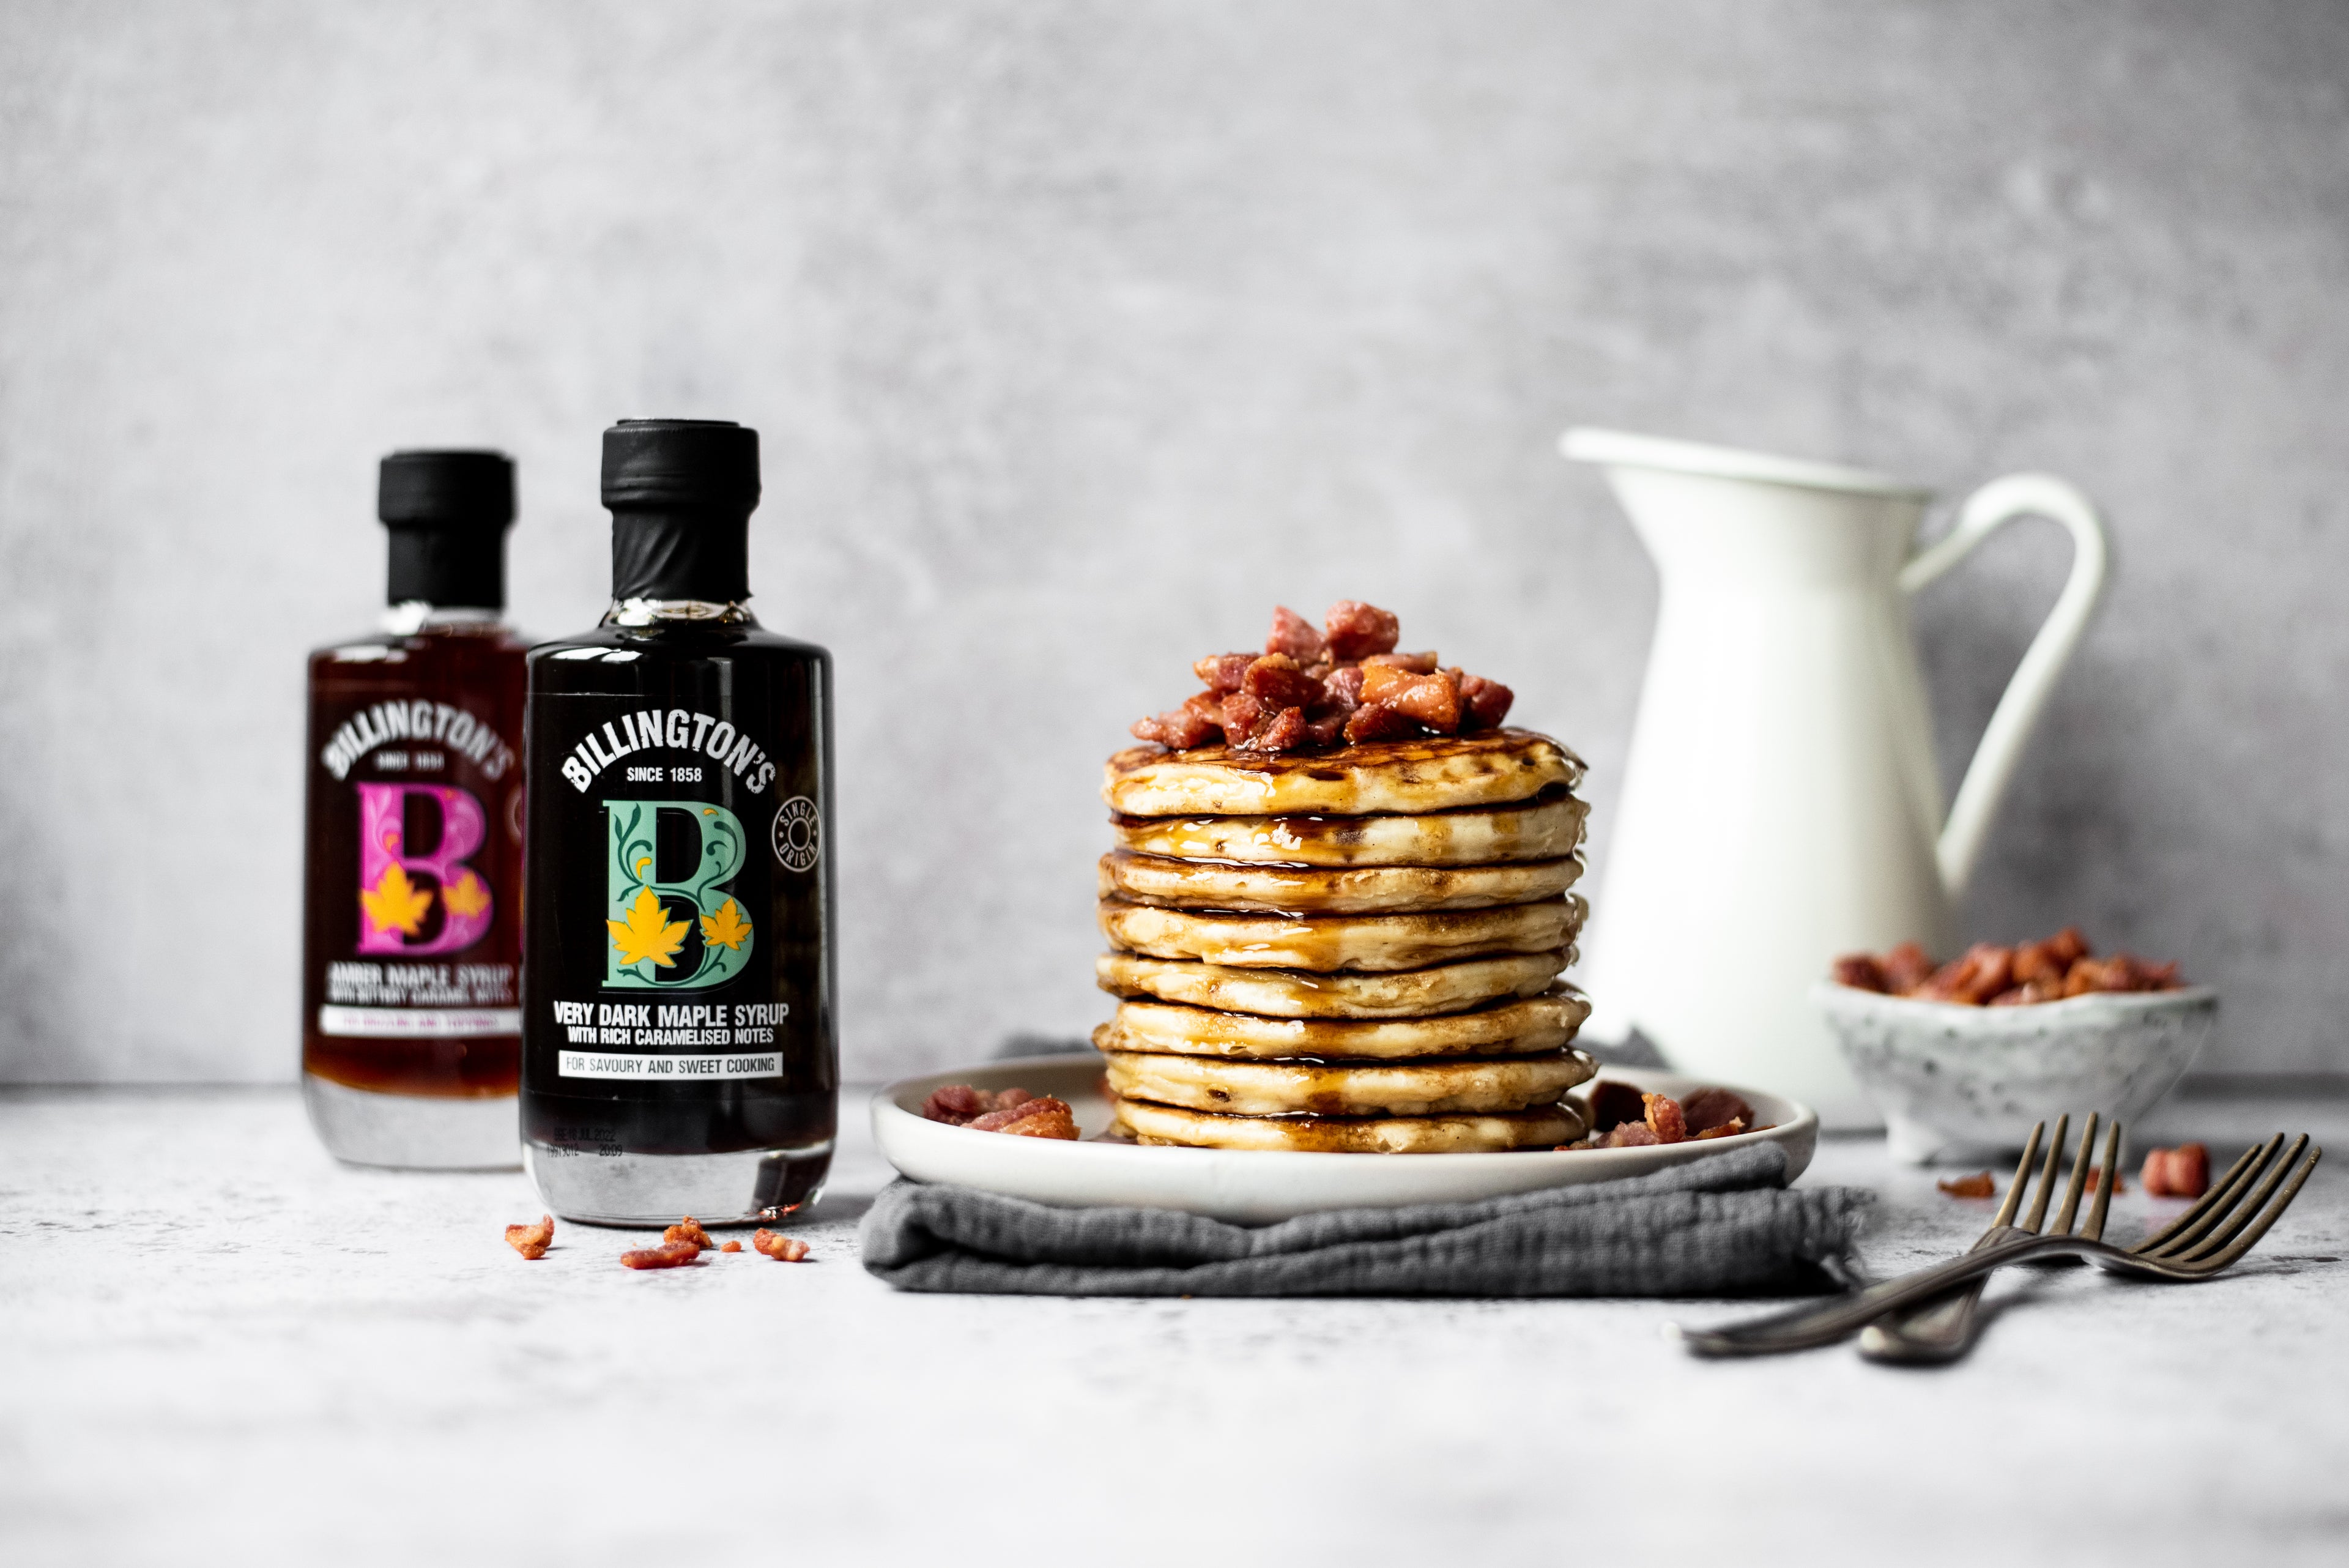 Pancake stack with bacon/ Maple syrup bottles and jug in background